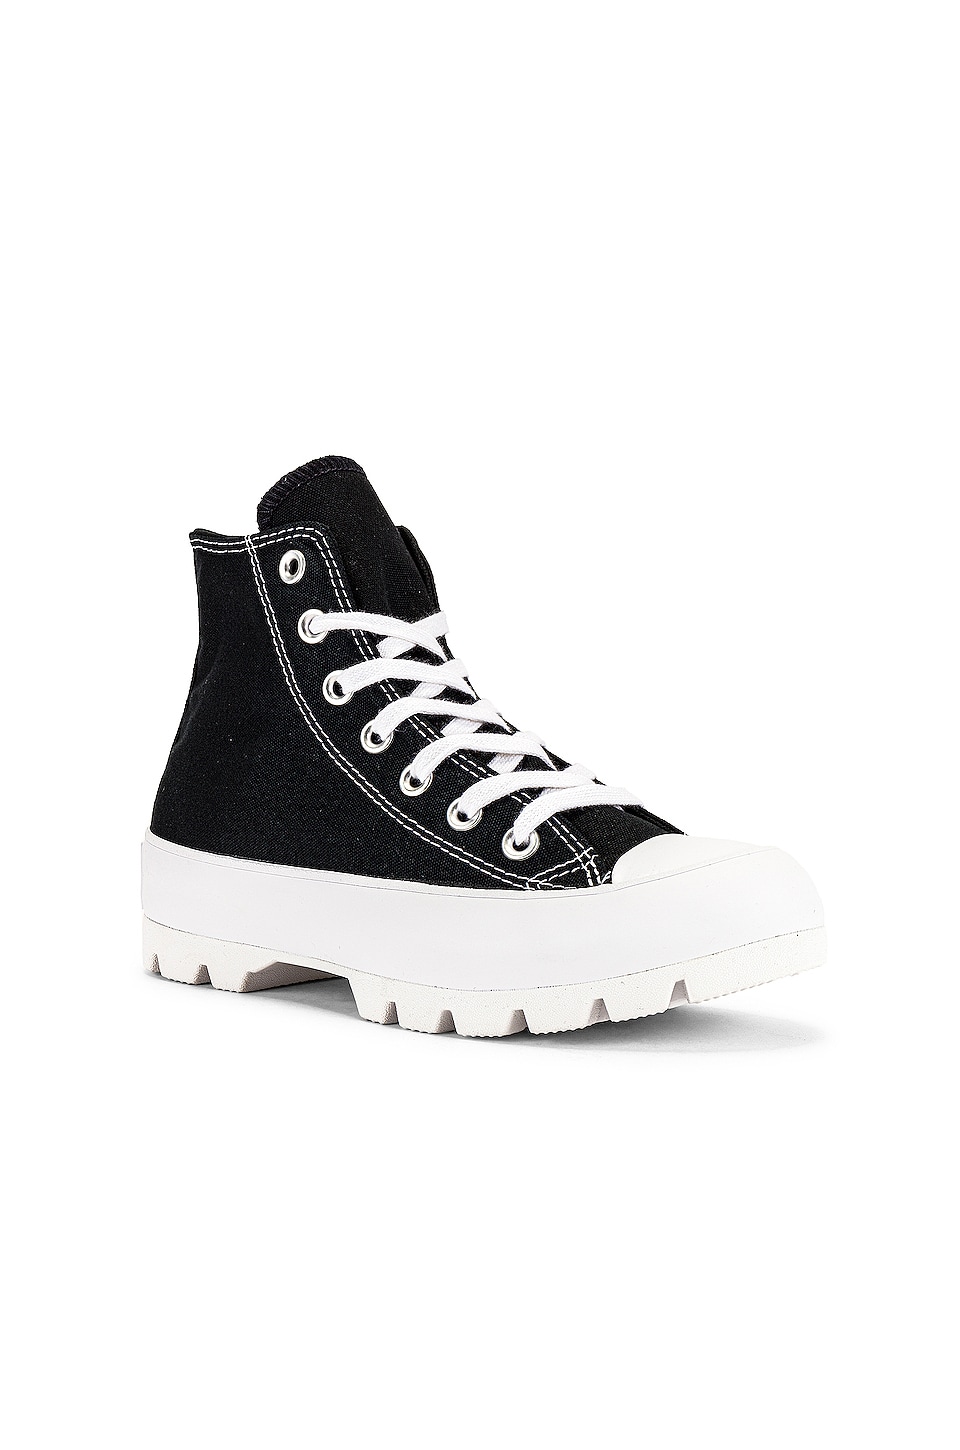 Converse Chuck Taylor All Star Lugged Hi Sneaker in Black & White | REVOLVE